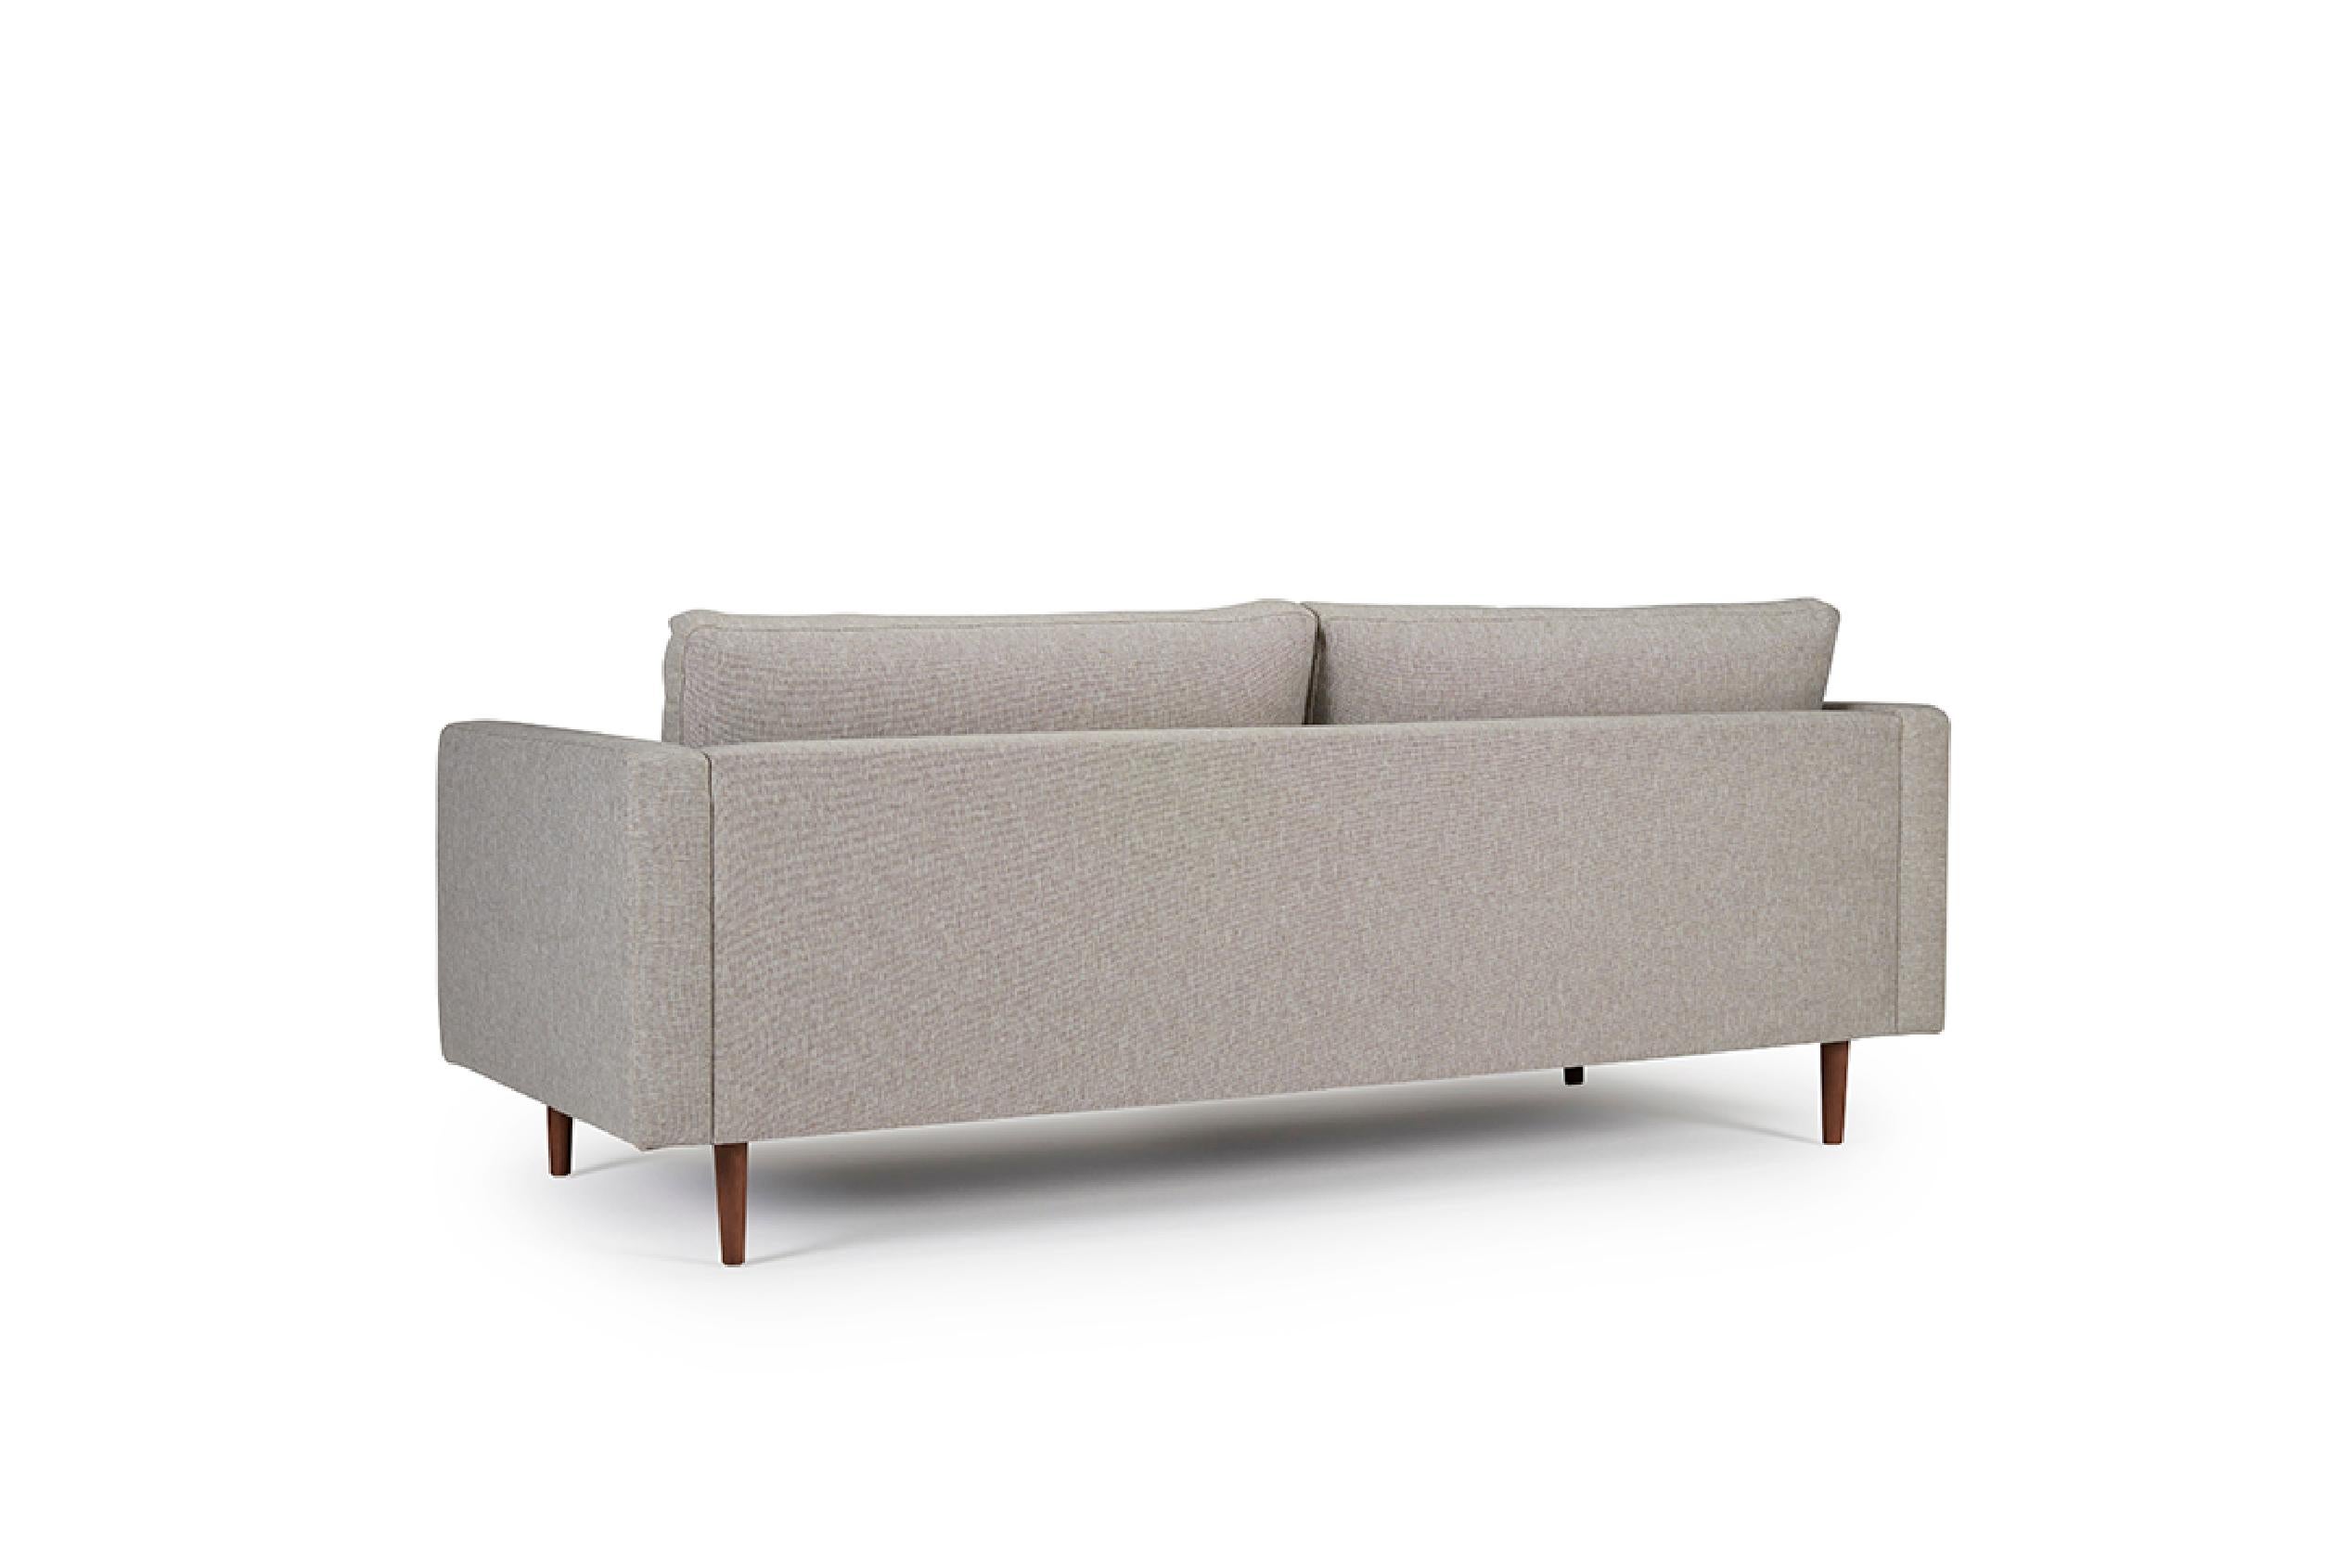 Channeling a classic mid-century Scandinavian modern design, the Clasico 3 Seater Sofa effortlessly combines timeless aesthetics and contemporary comfort. As an OEM product, it presents various wood finishes for the legs and a selection of fabric or